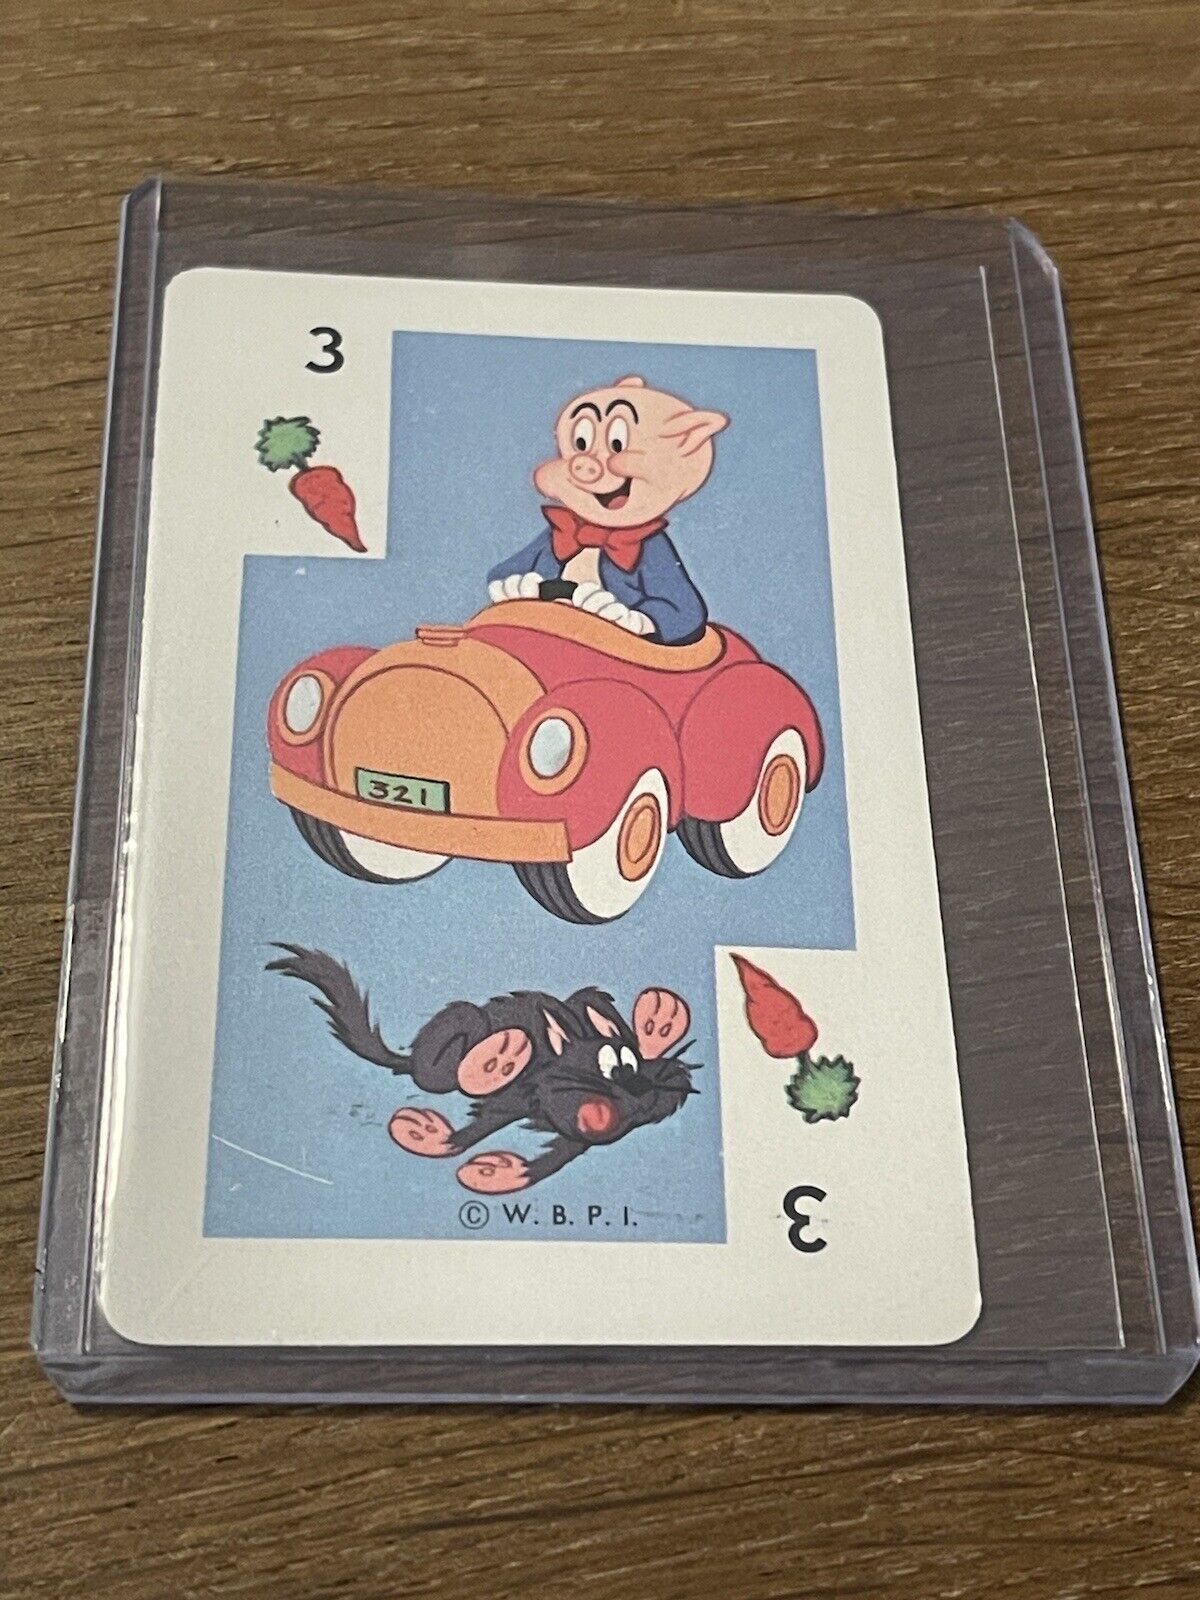 1966 WARNER BROS. PICTURES WHITMAN BUGS BUNNY PORKY PIG CARD GAME PLAYING CARD